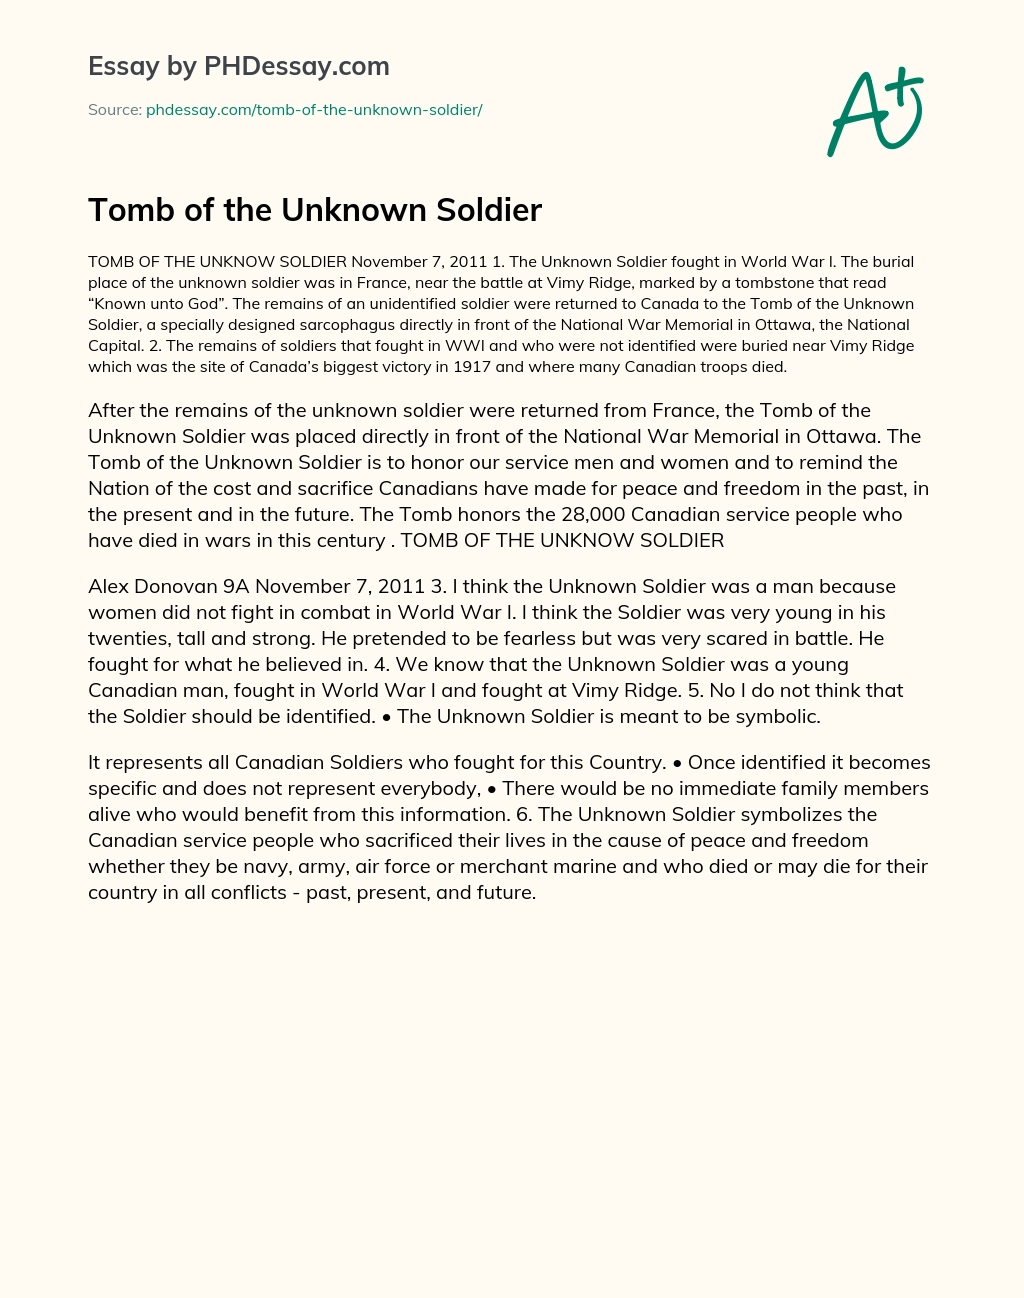 Tomb of the Unknown Soldier essay